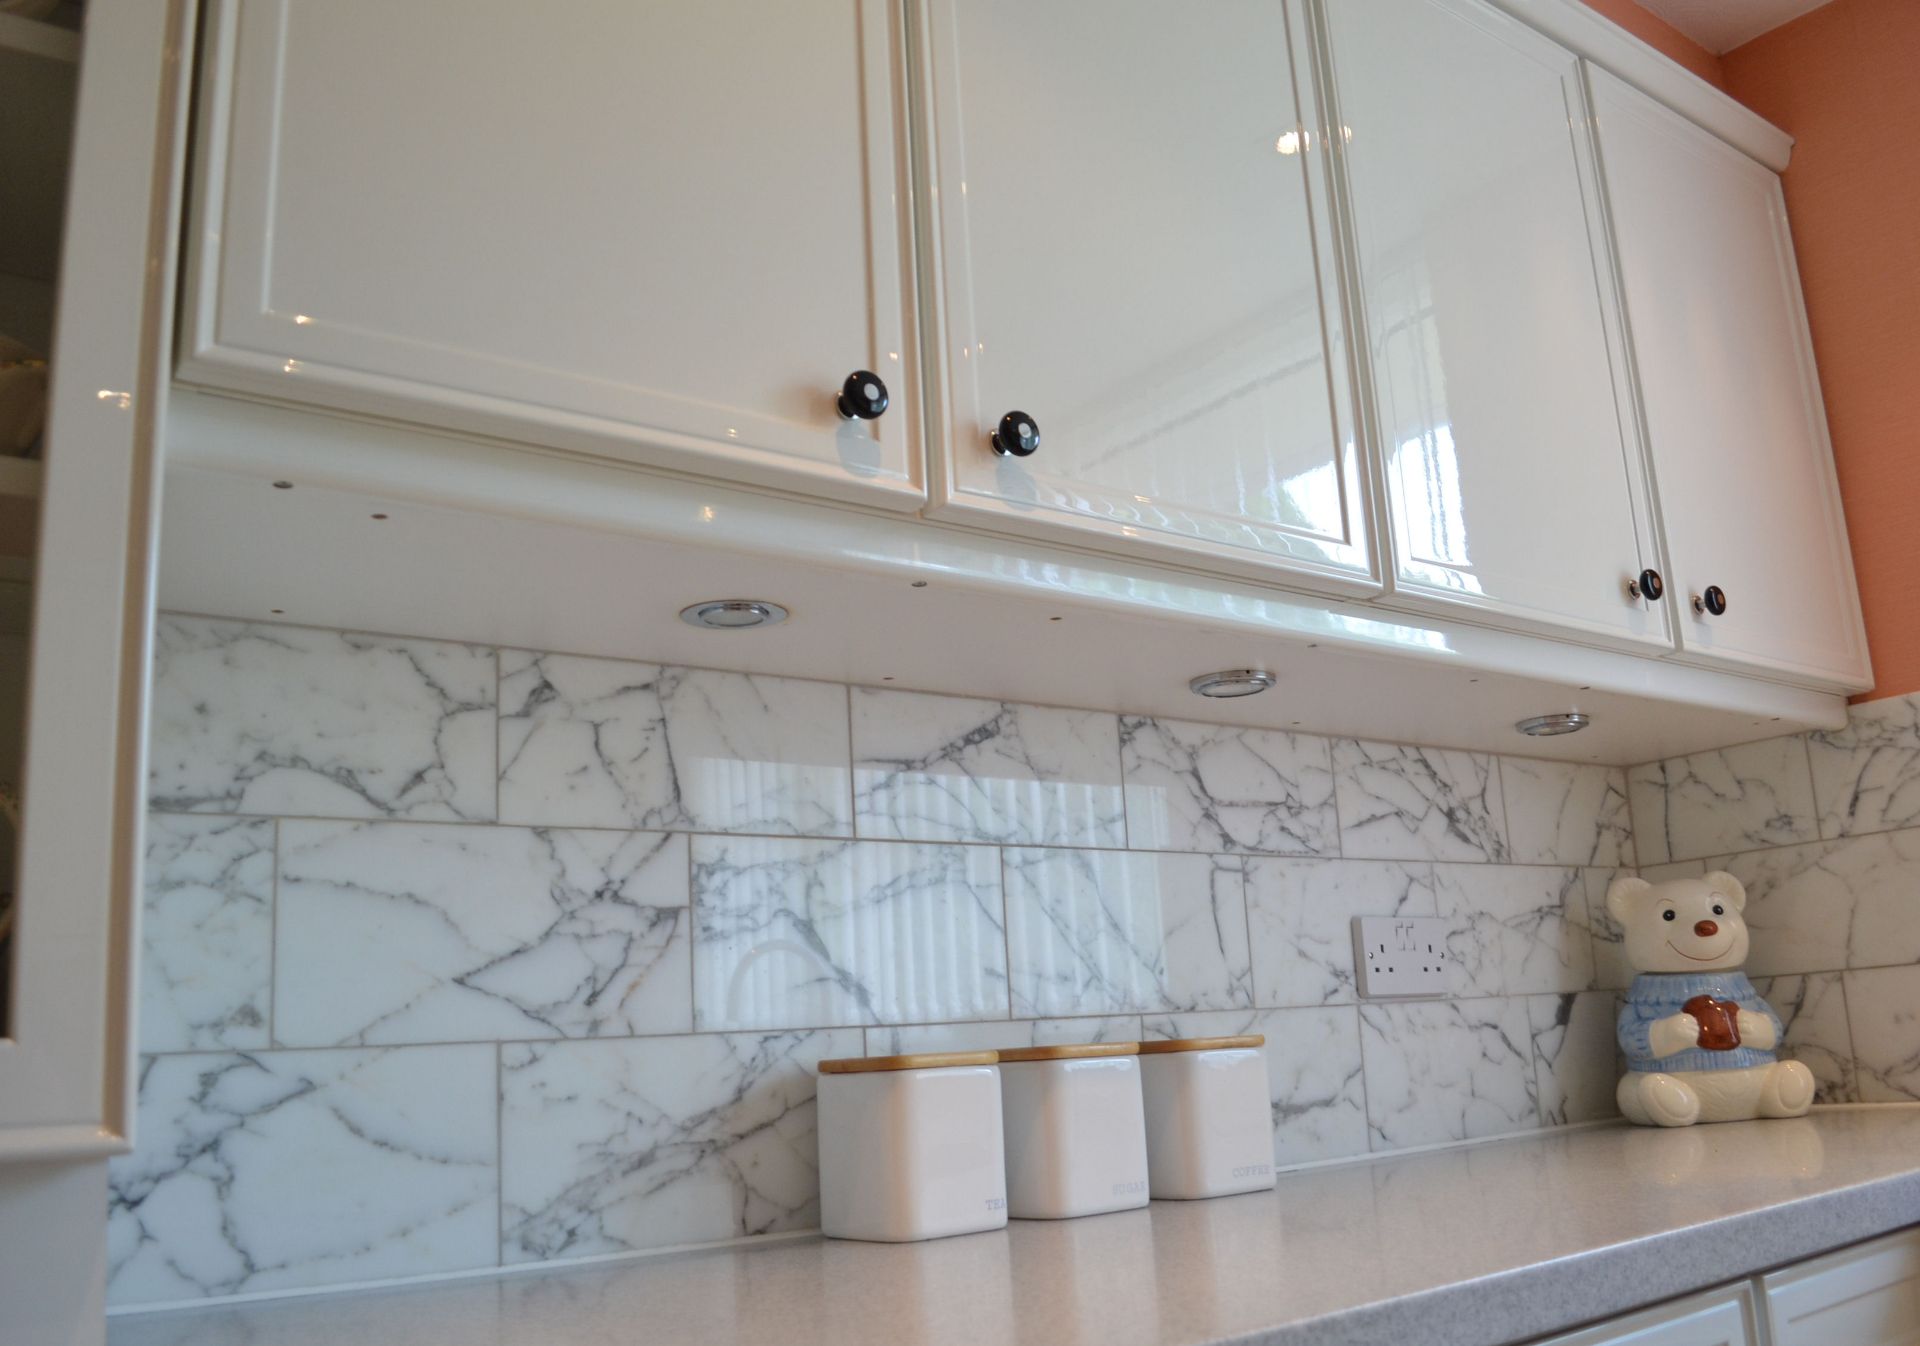 1 x Stunning Bespoke Siematic Gloss White Fitted Kitchen With Corian Worktops - NO VAT ON HAMMER - Image 16 of 18